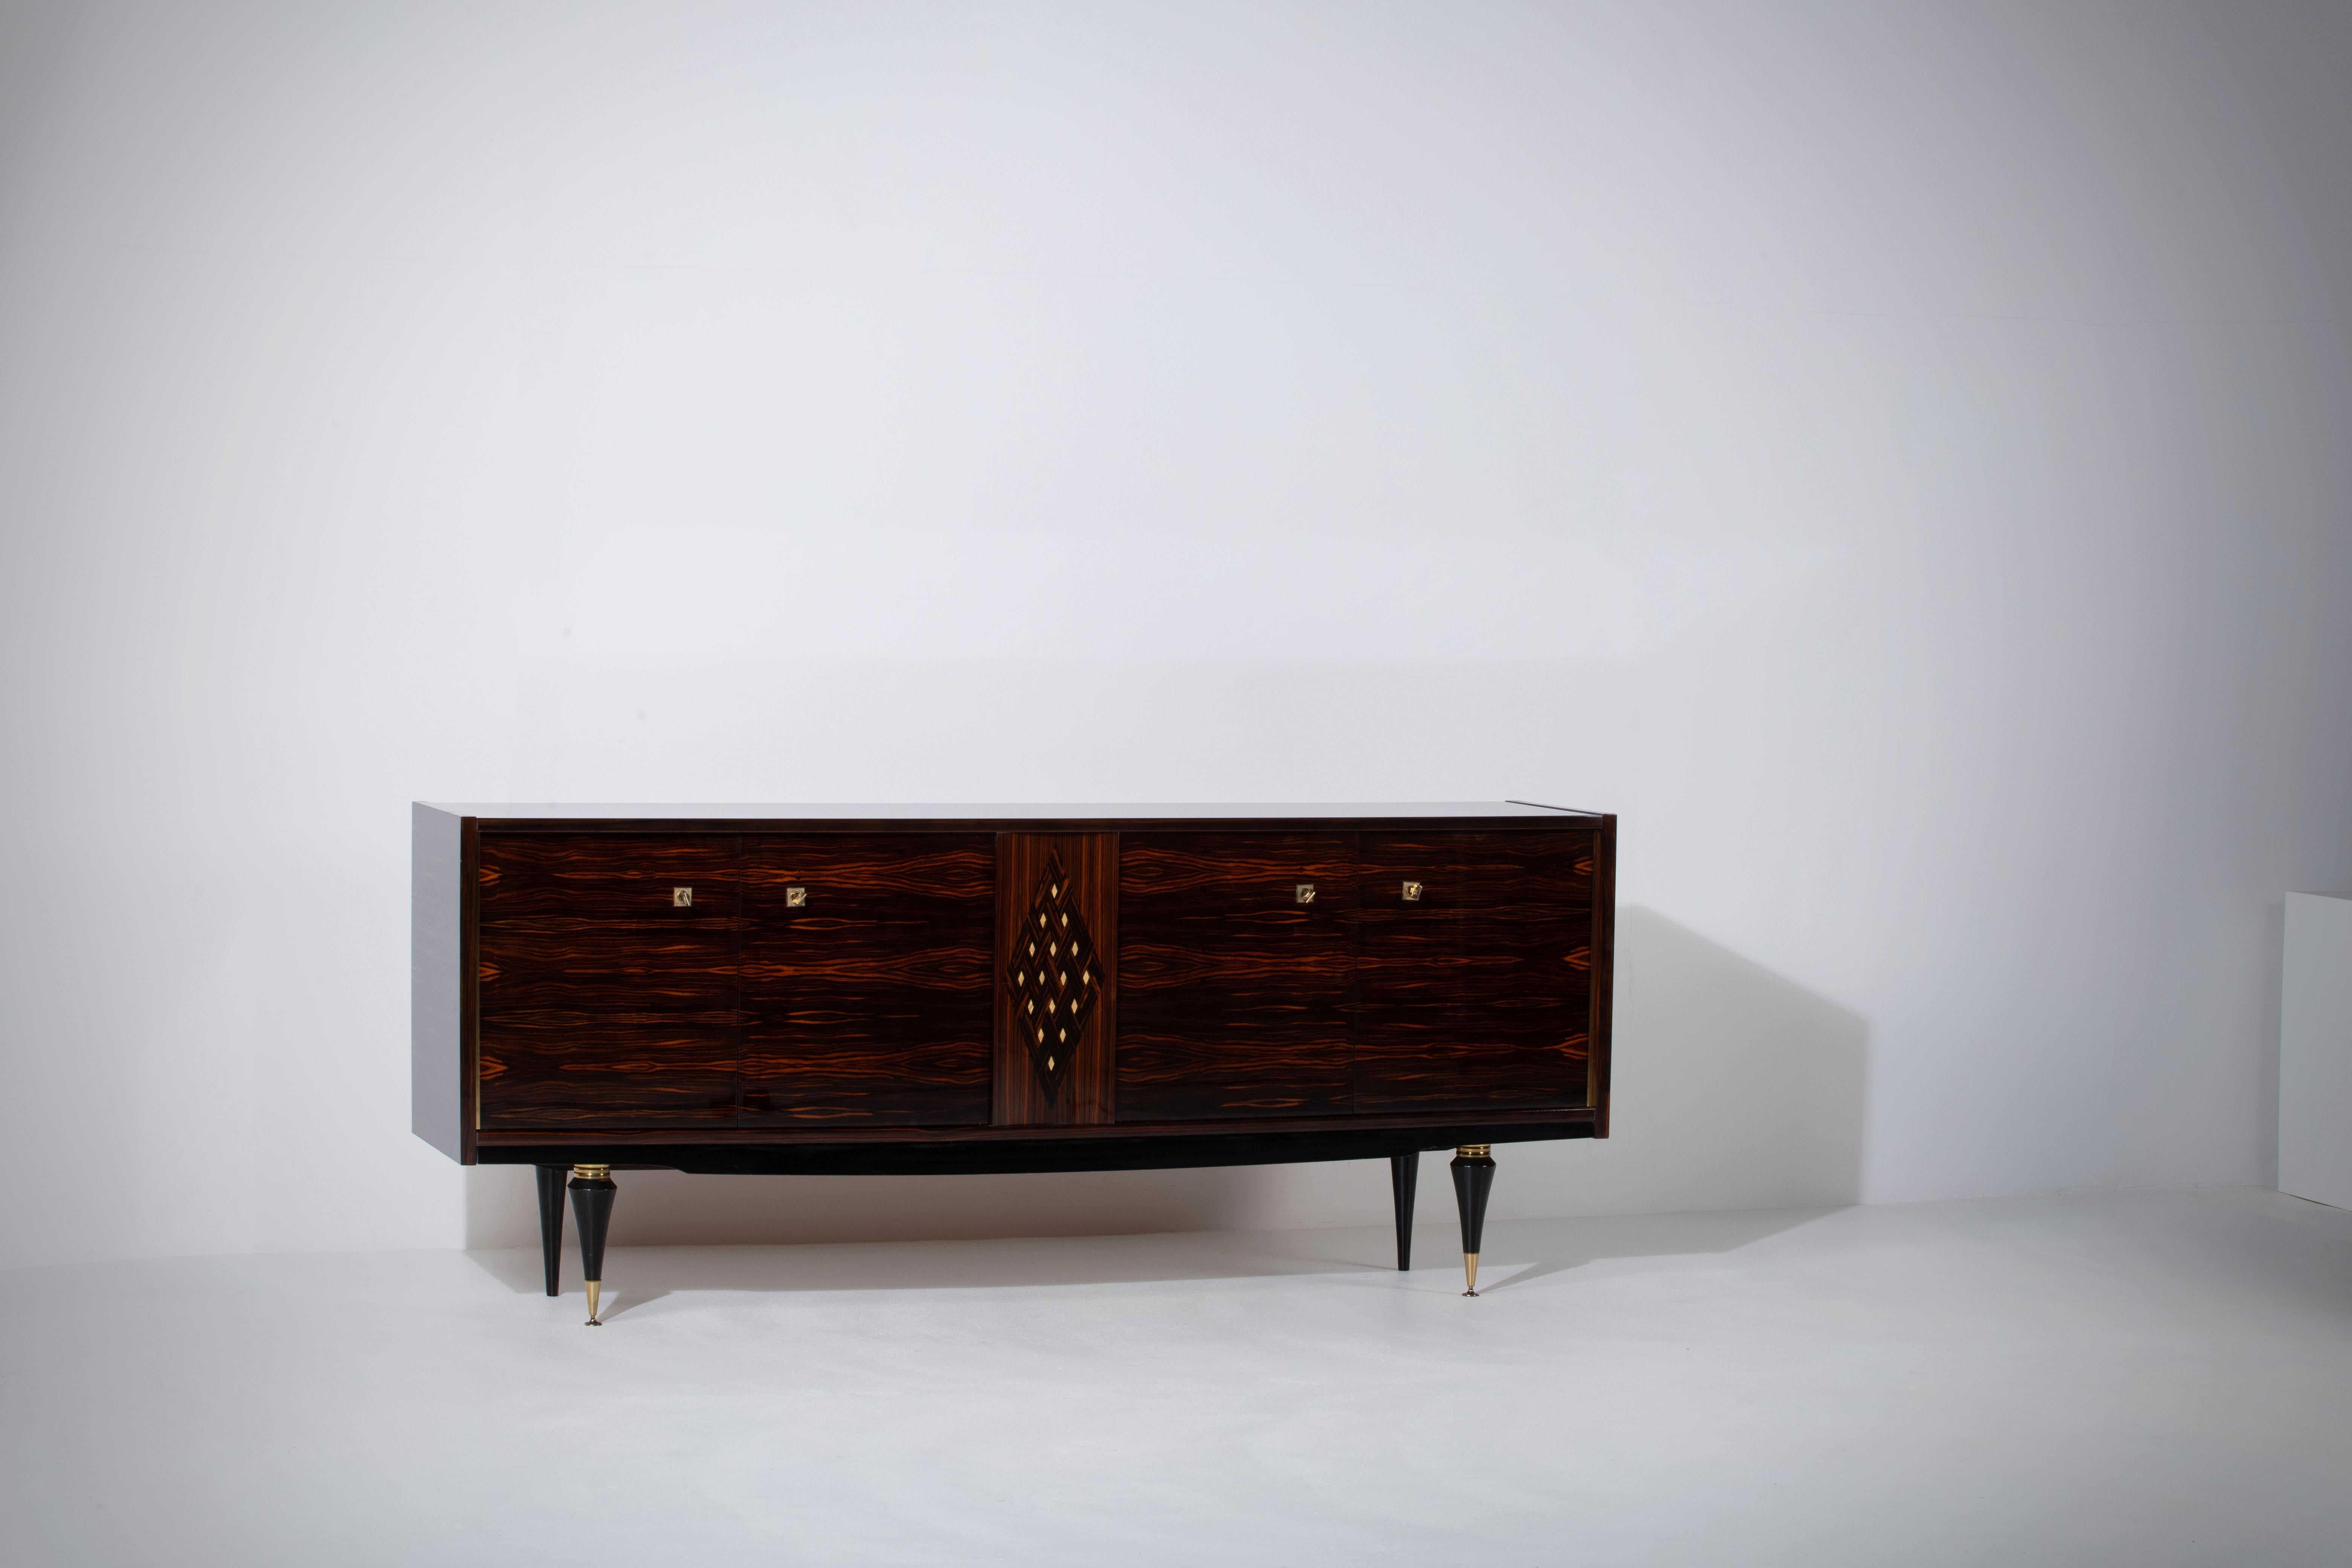 French Art Deco sideboard, credenza, with bar cabinet. 
The sideboard features stunning Macassar wood grain and rich pattern, mother of pearl. It offers ample storage, with shelves.
The case rests on tall tapered legs with brass details. 
A